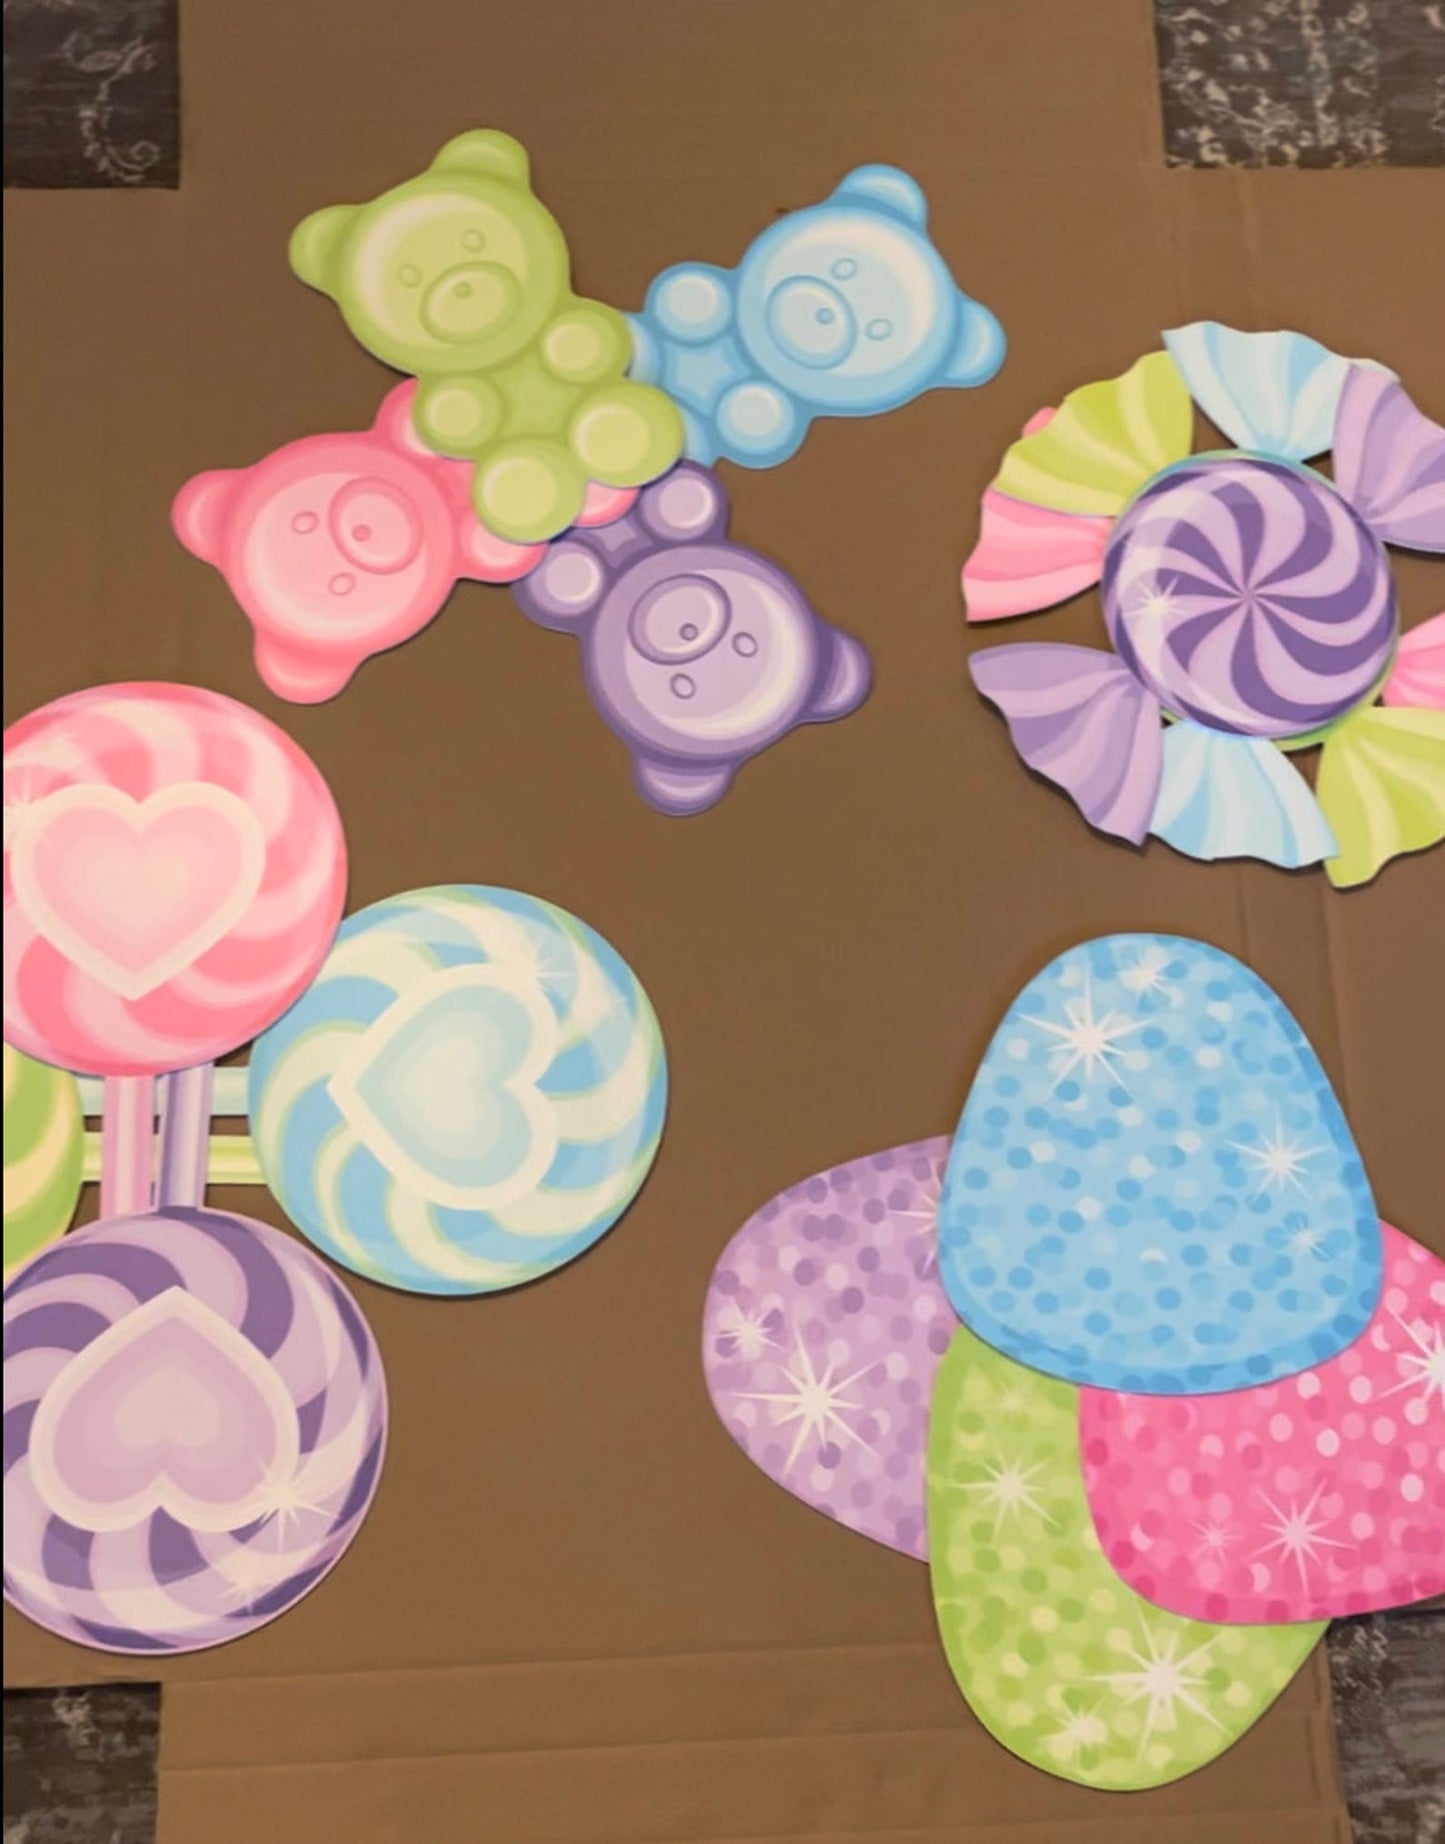 Candy Themed Wall Decor